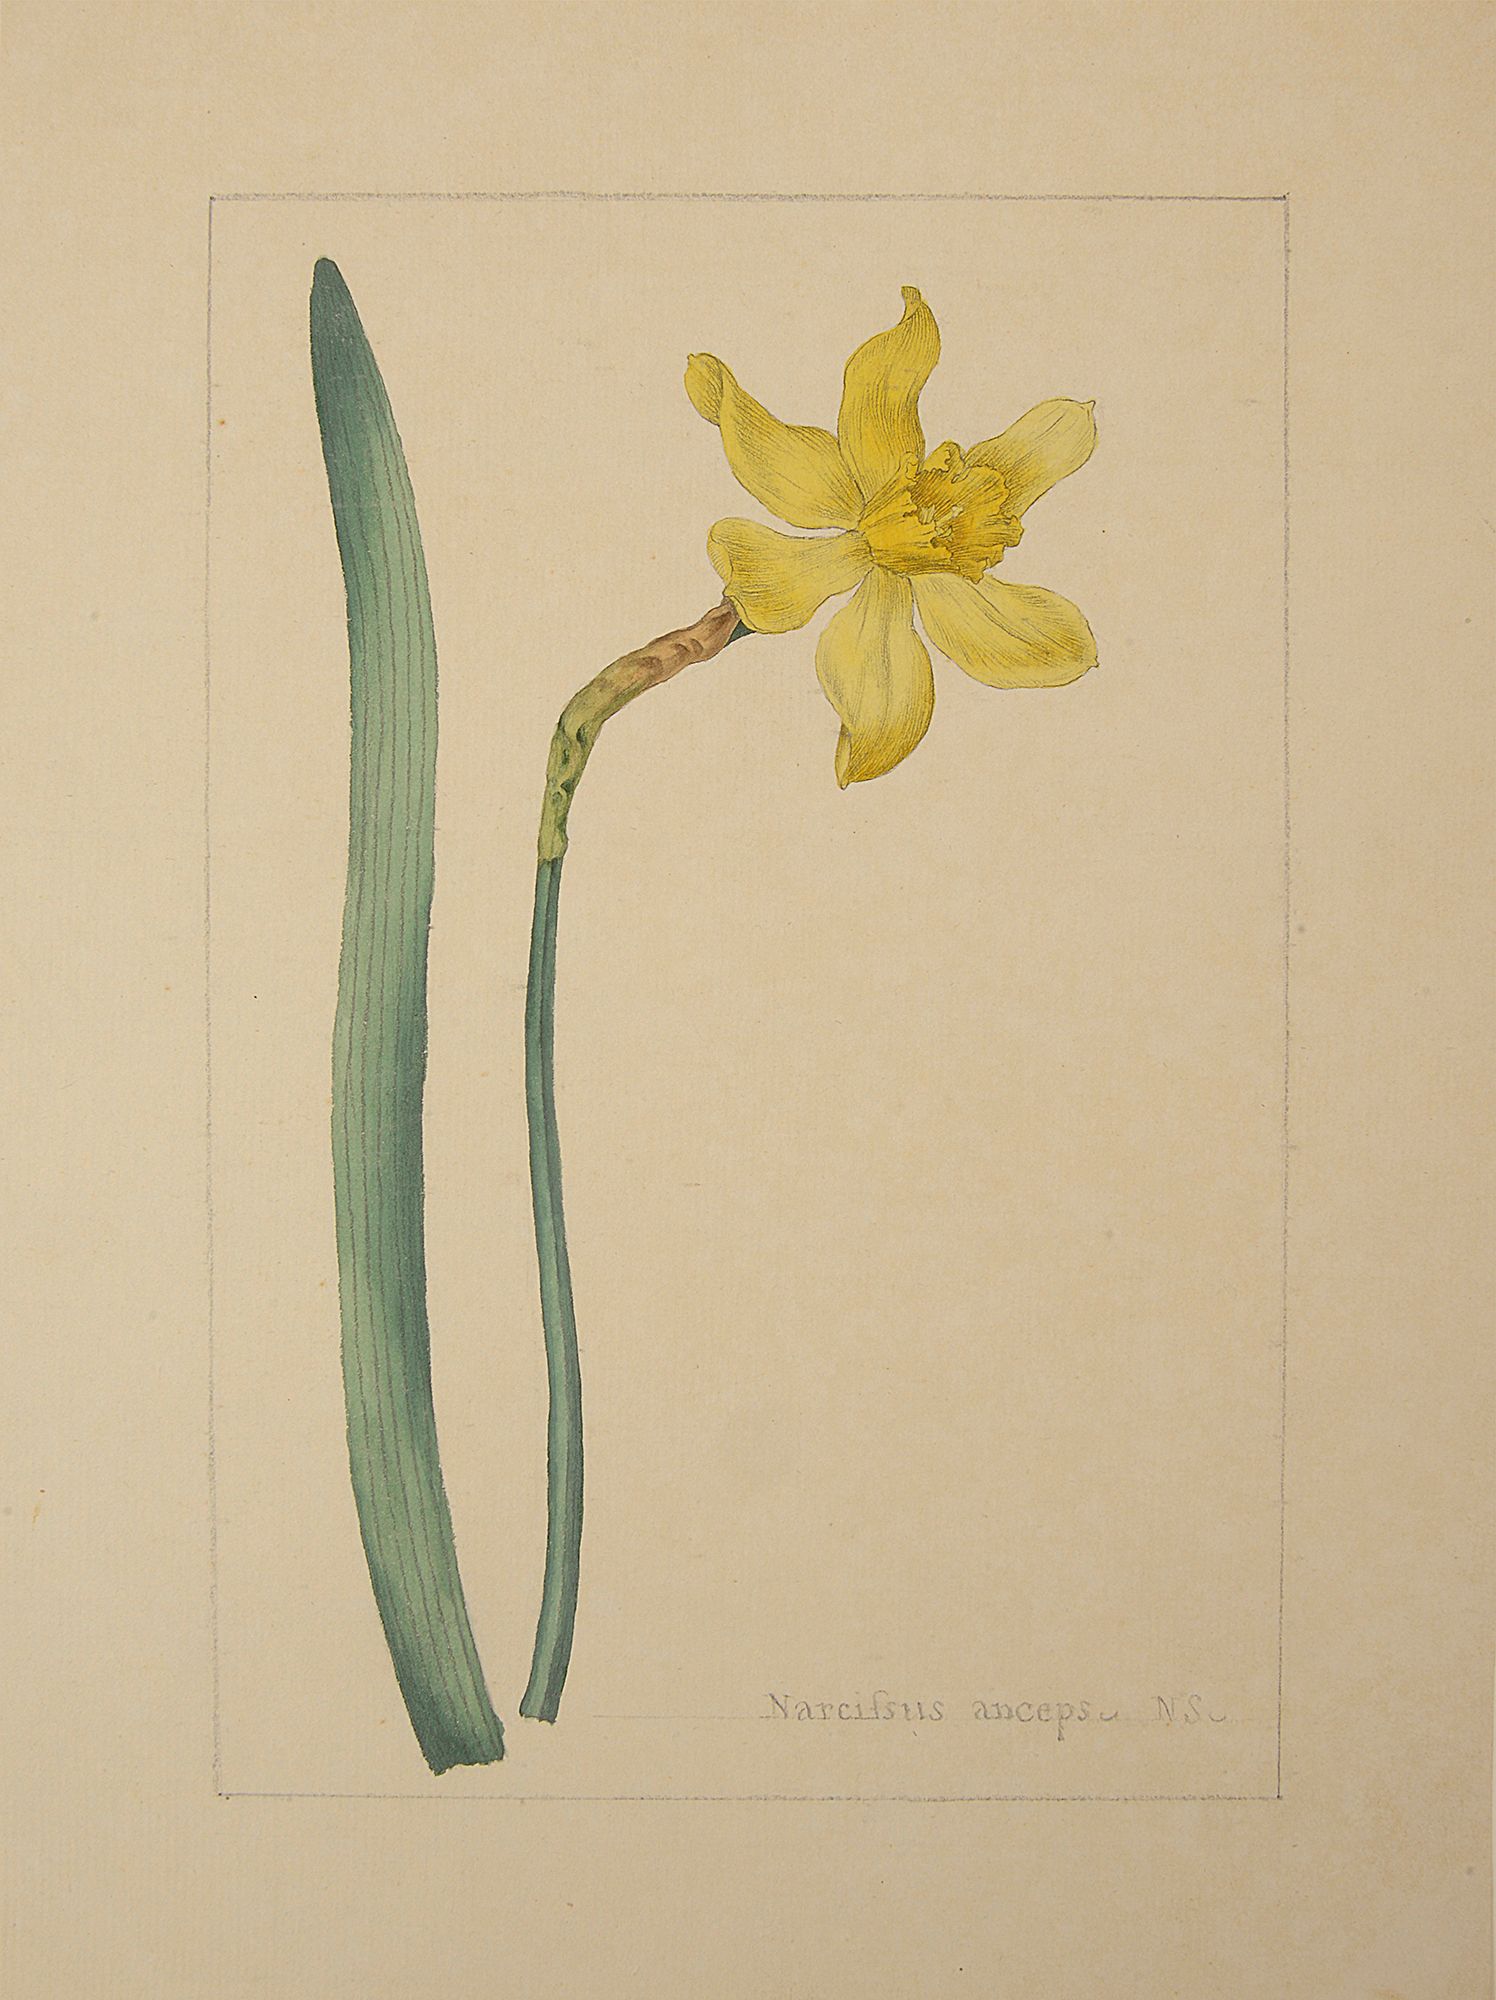 A botanical study of Narcissus from the collection of William Curtis (1746-1799), - Image 2 of 3